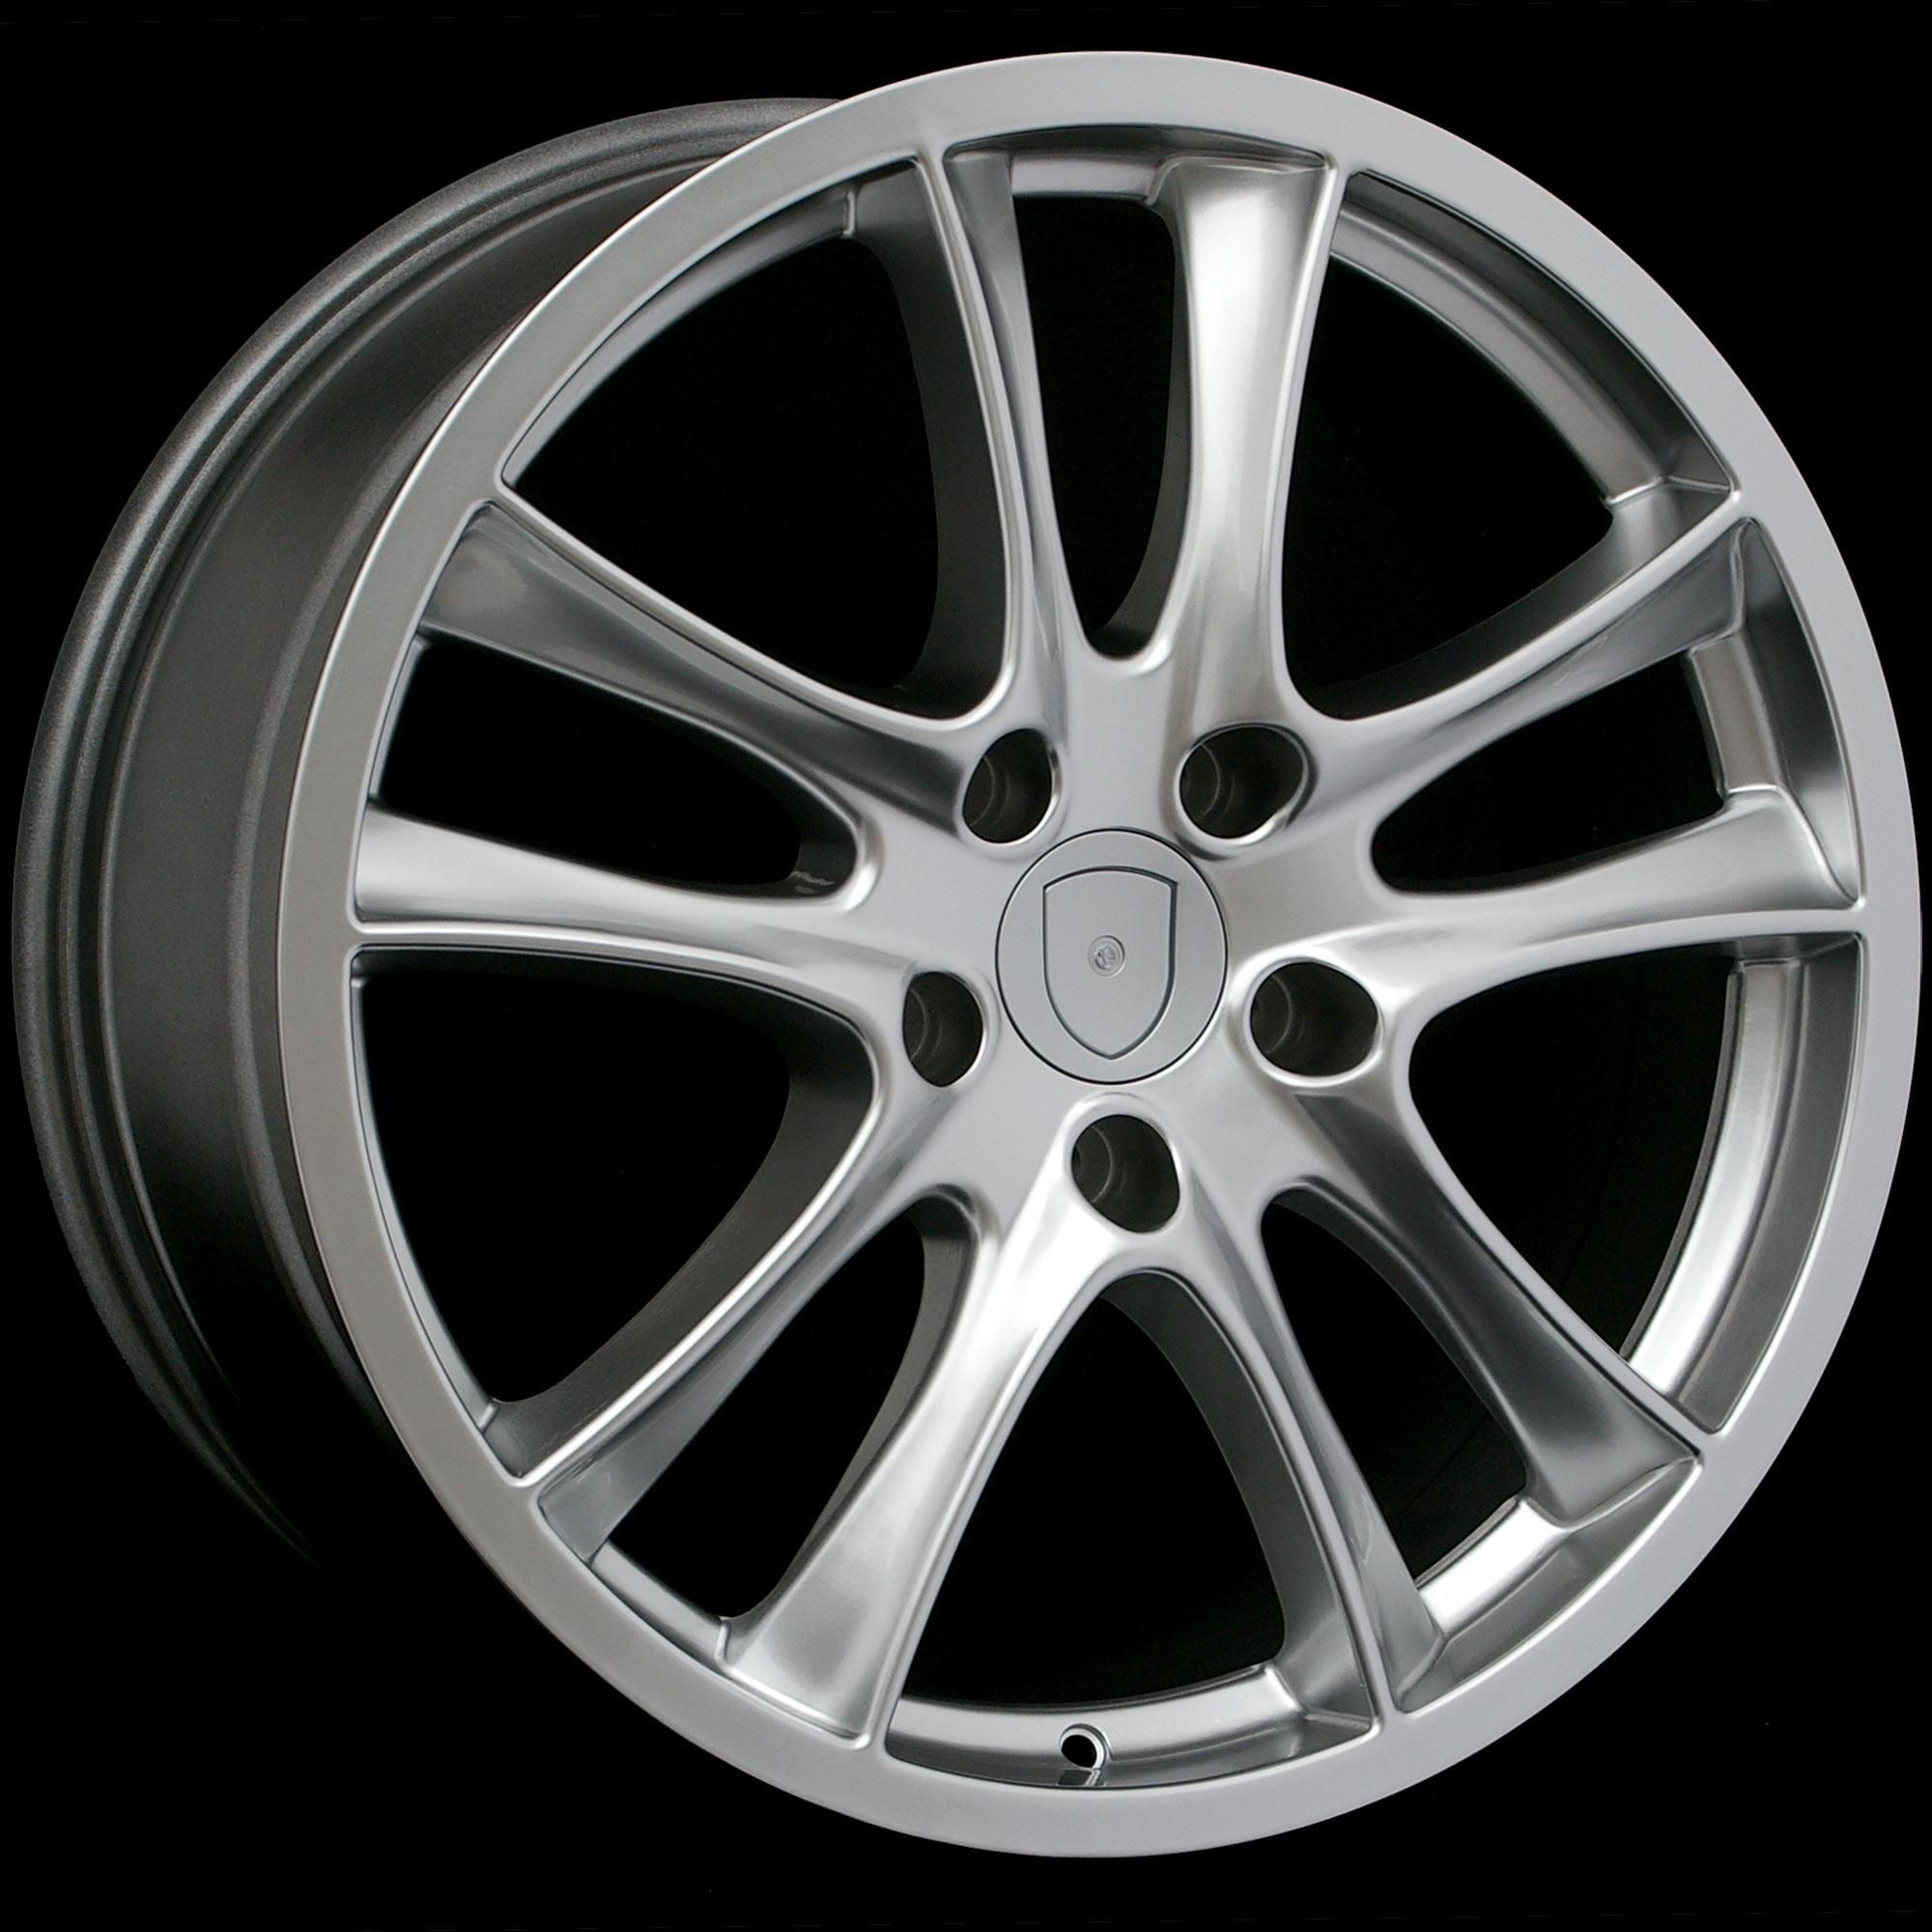 20 GTS Style Hyper Silver Wheels Rims Fits Porsche Cayenne and